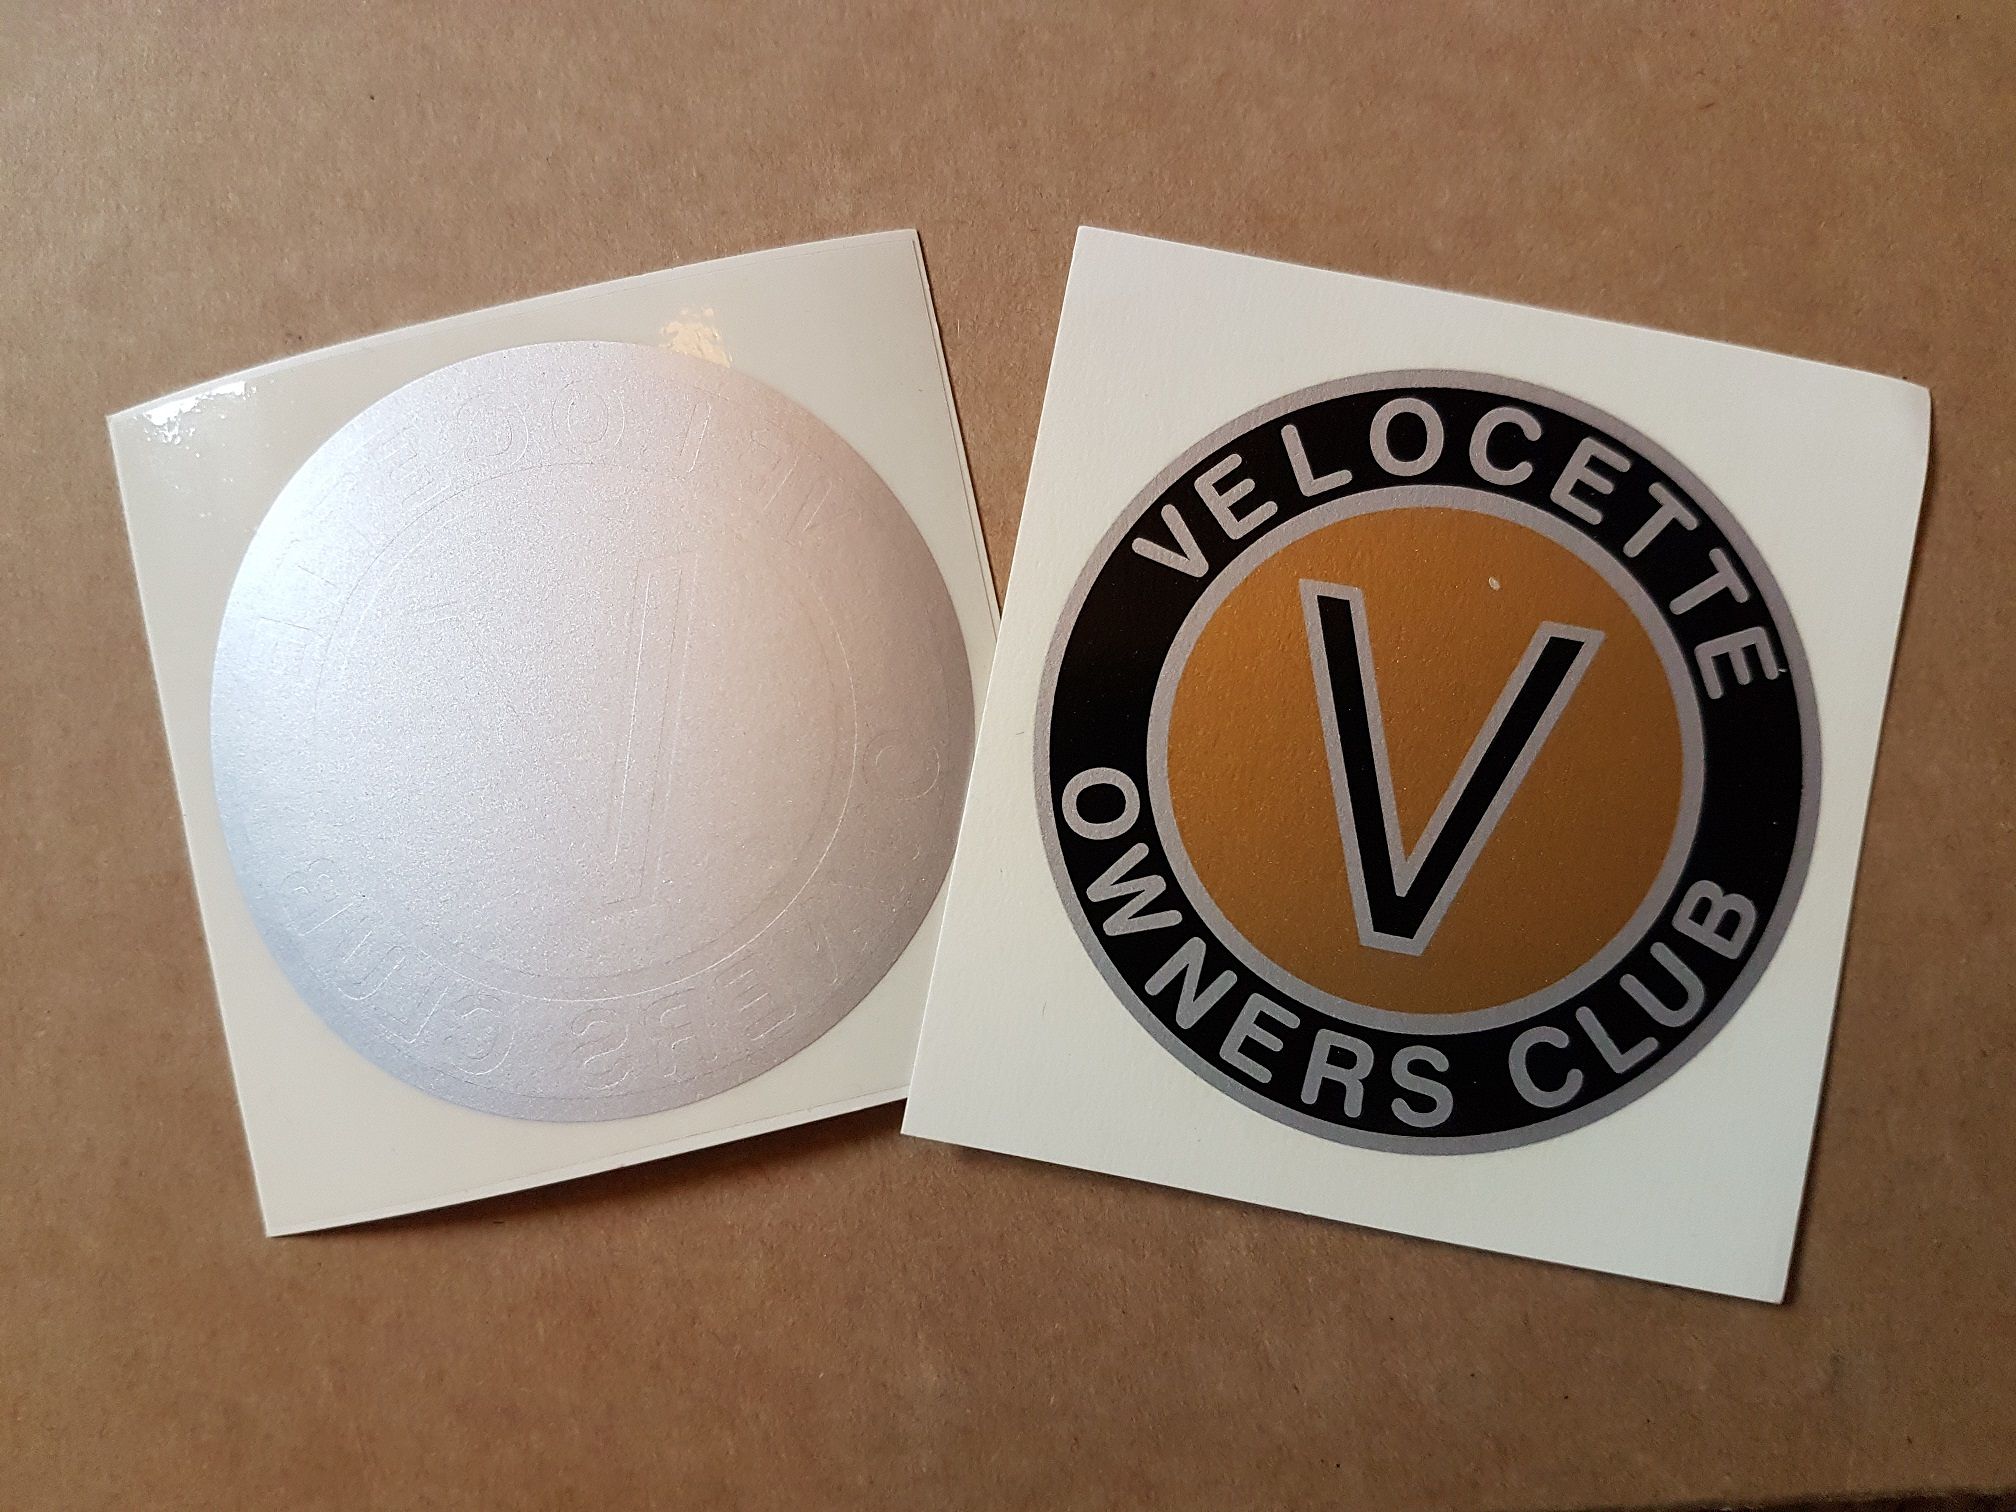 Pack of Velocette stickers